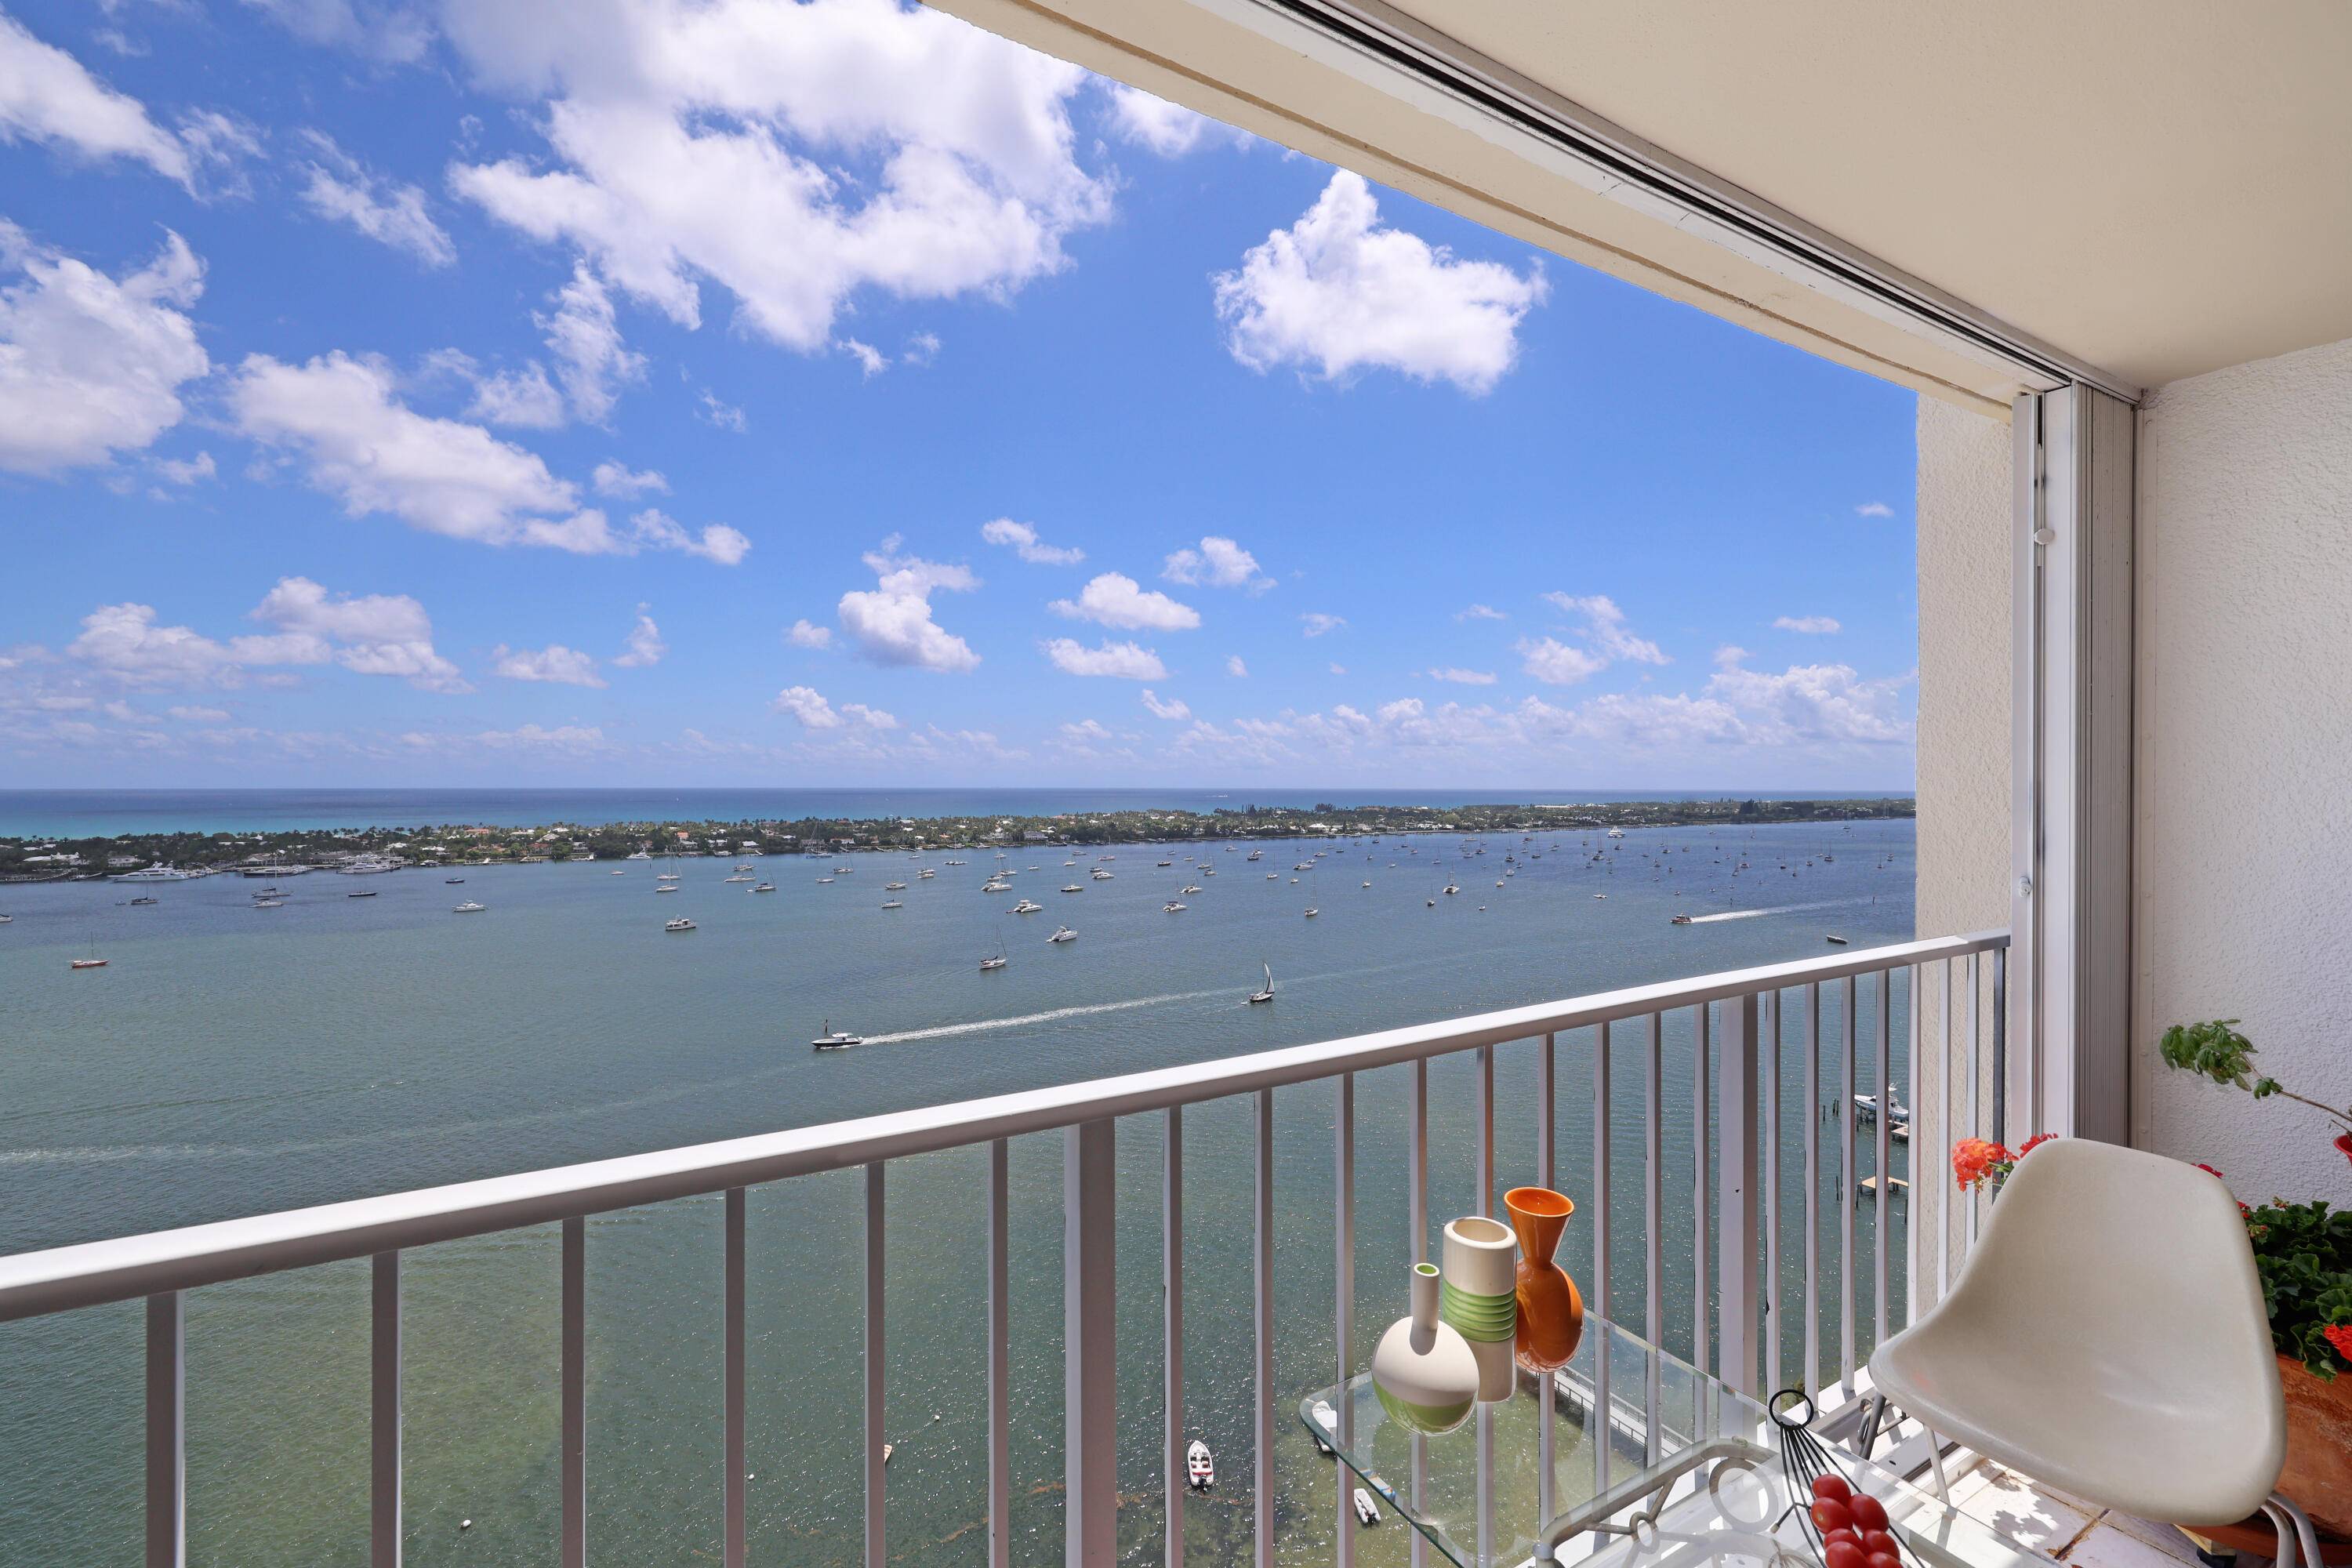 MILLION DOLLAR AND RARELY OFFERED DIRECT EAST VIEWS OF OCEAN, PALM BEACH ISLAND AND INTRACOASTAL FROM 25TH FLOOR.